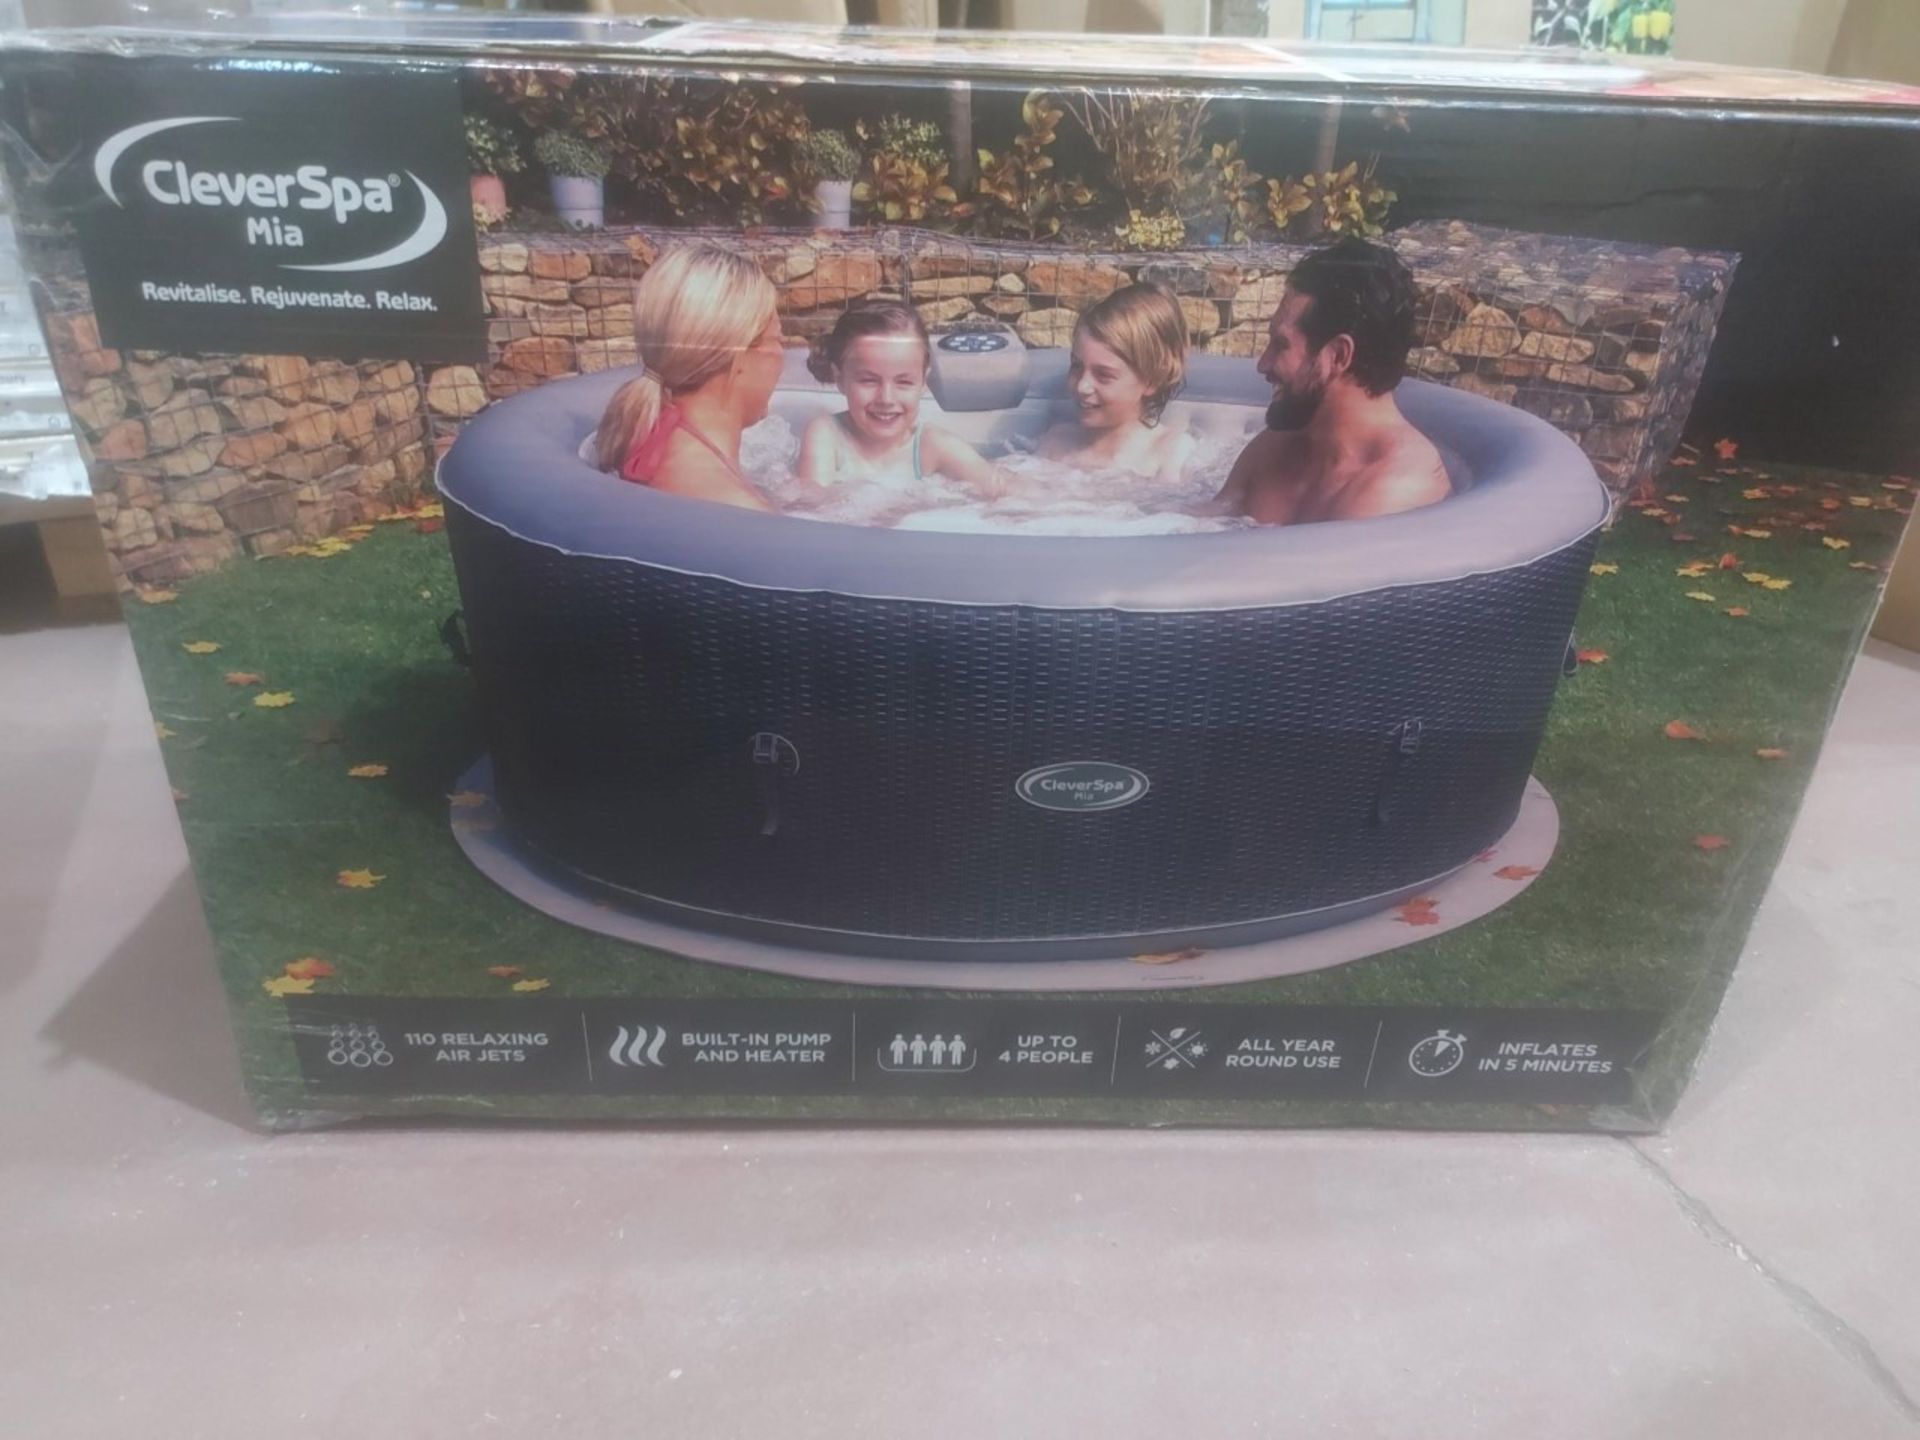 BOXED CleverSpa Mia Person Hot Tub. RRP £425 - UNCHECKED/UNTESTED